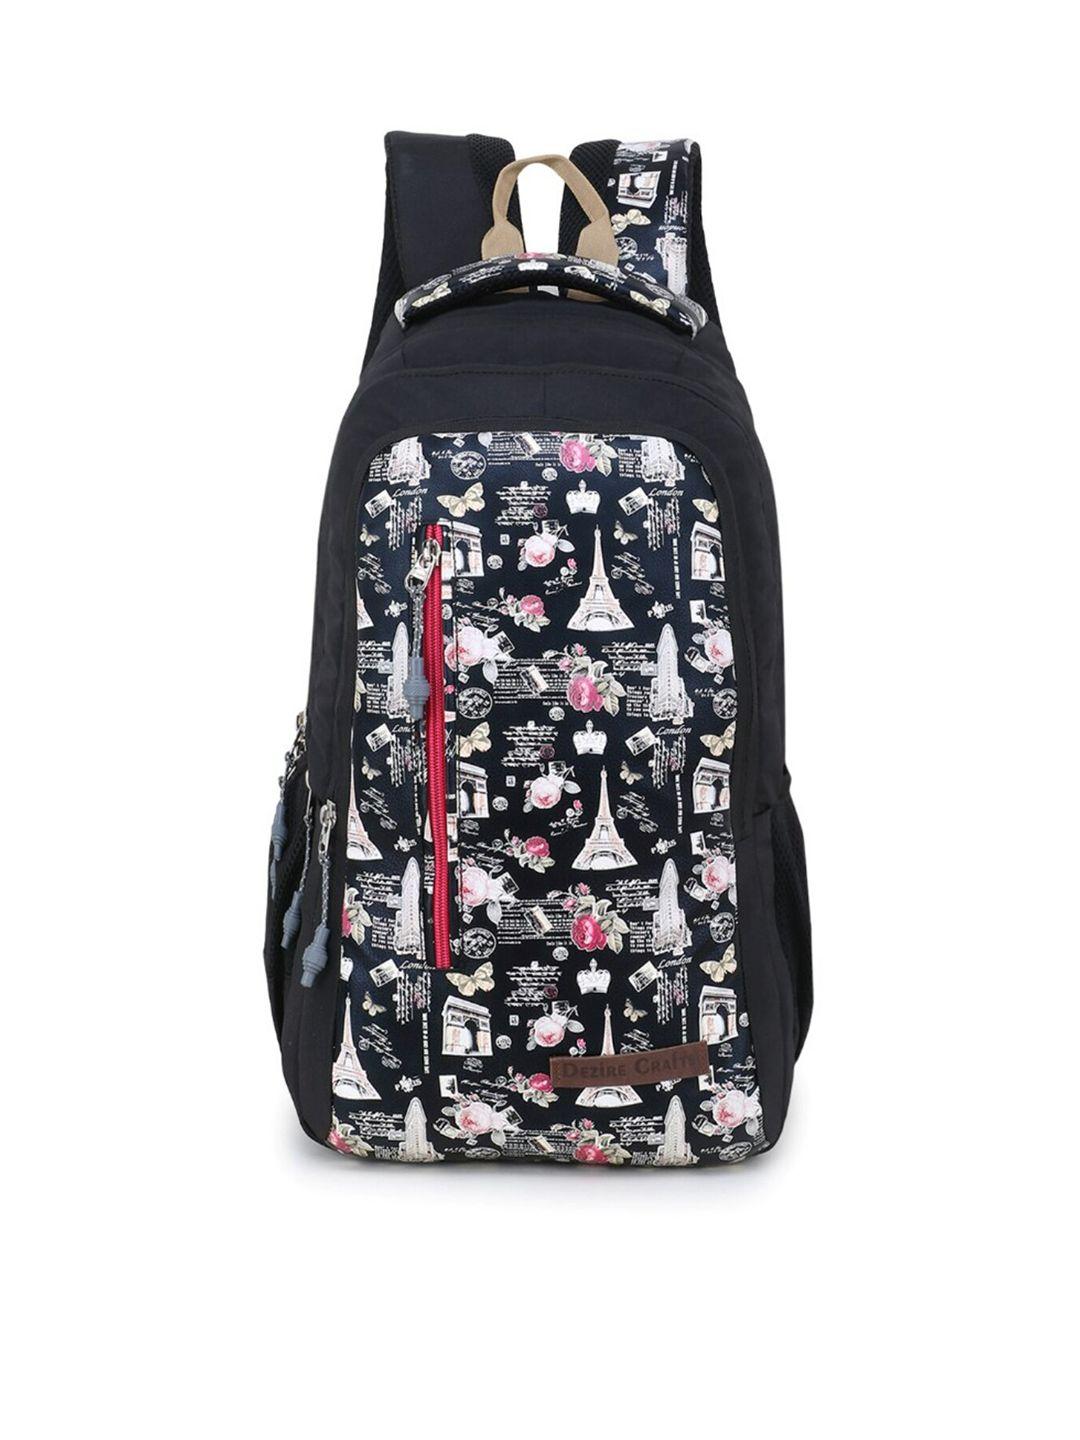 dezire crafts unisex graphic printed backpack